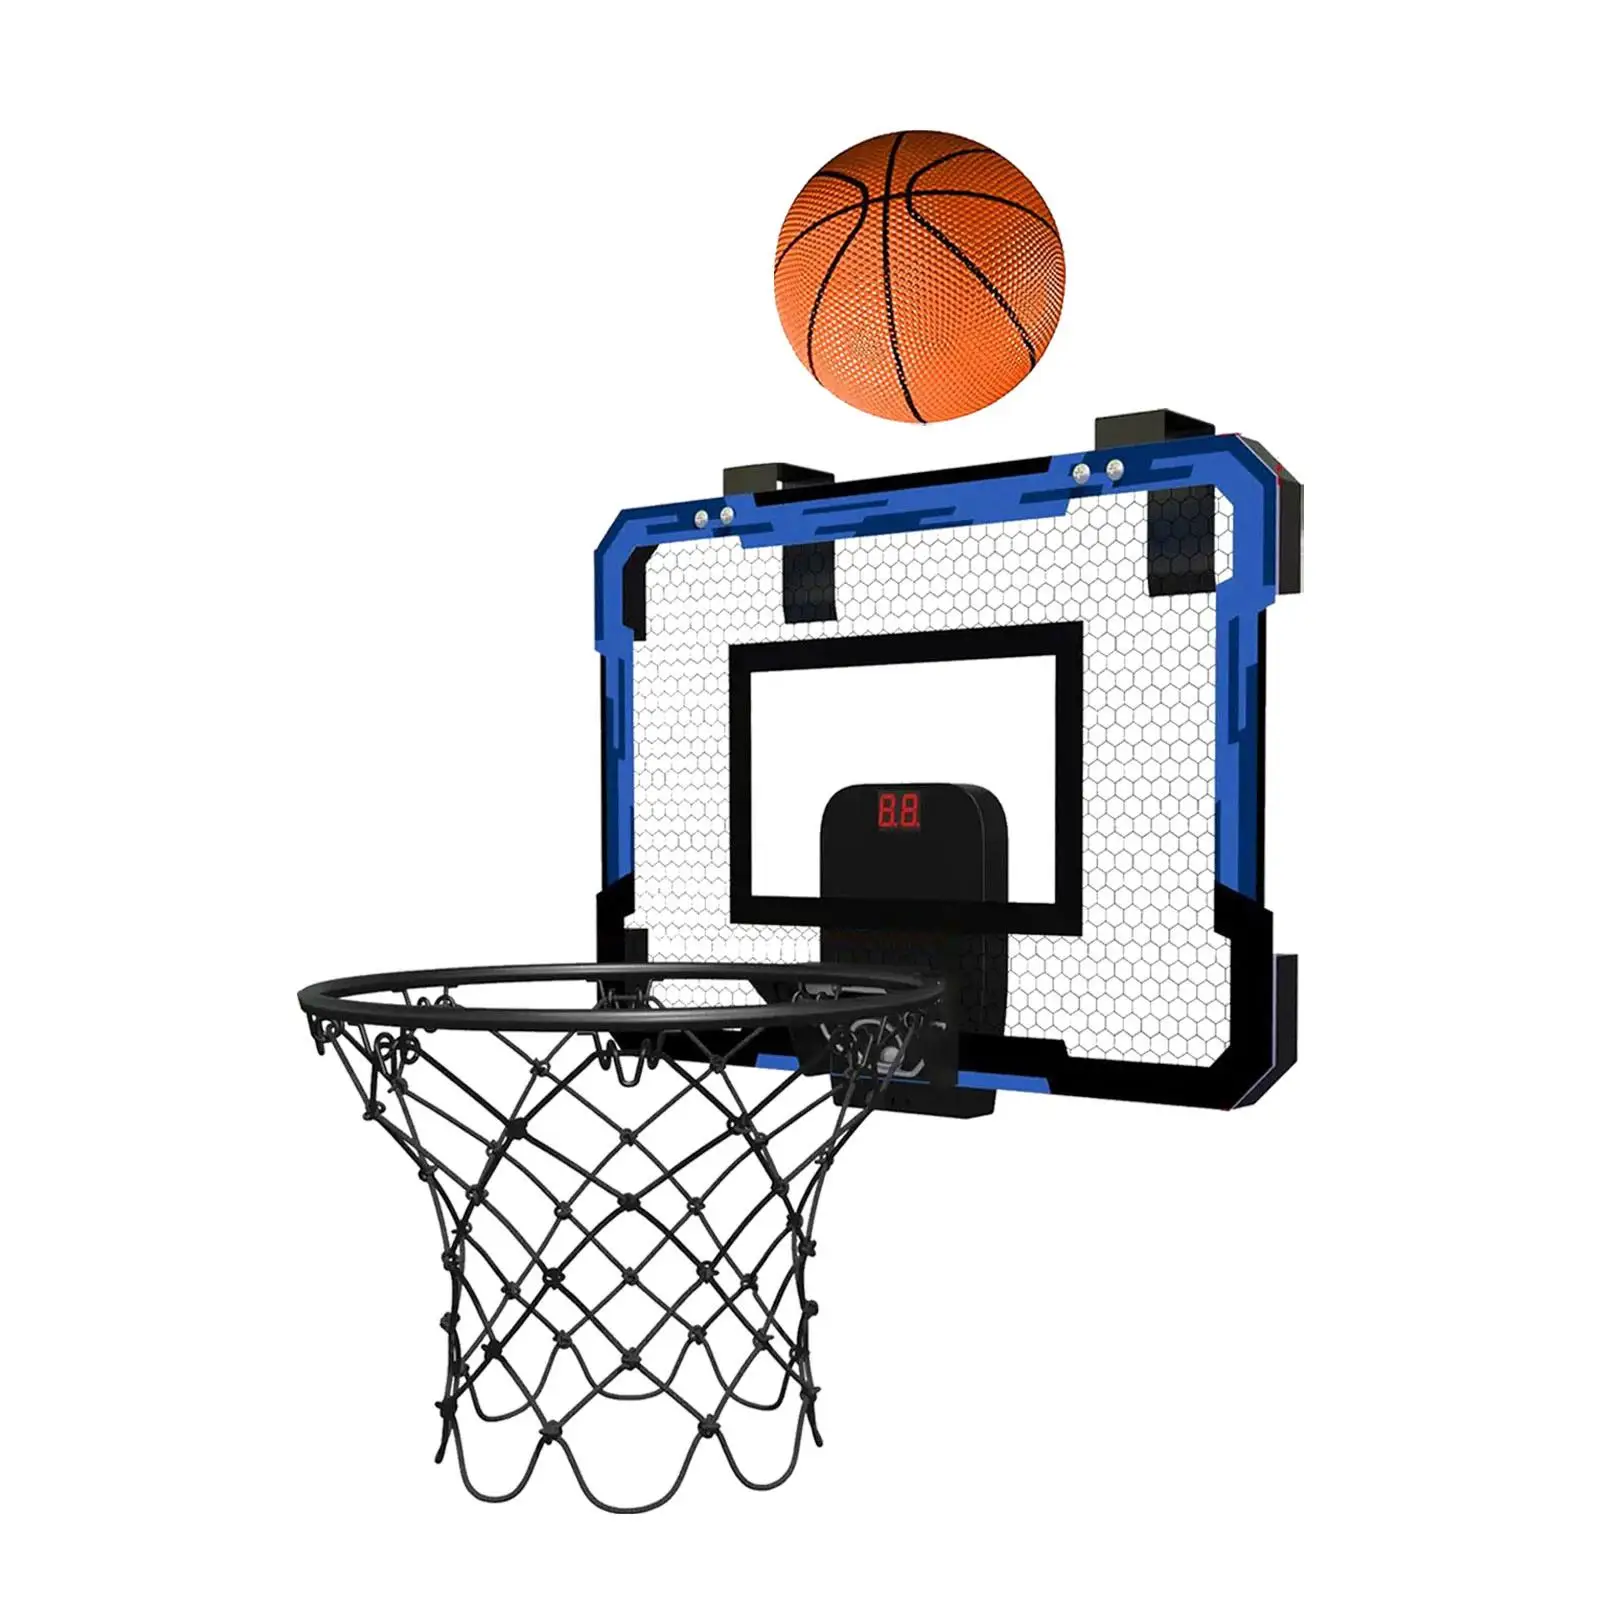 Basketball Hoop Sports Game with Pump Accessories with Balls Mini Hoop Set Door Basketball Hoops for Outdoor Indoor Boys Kids